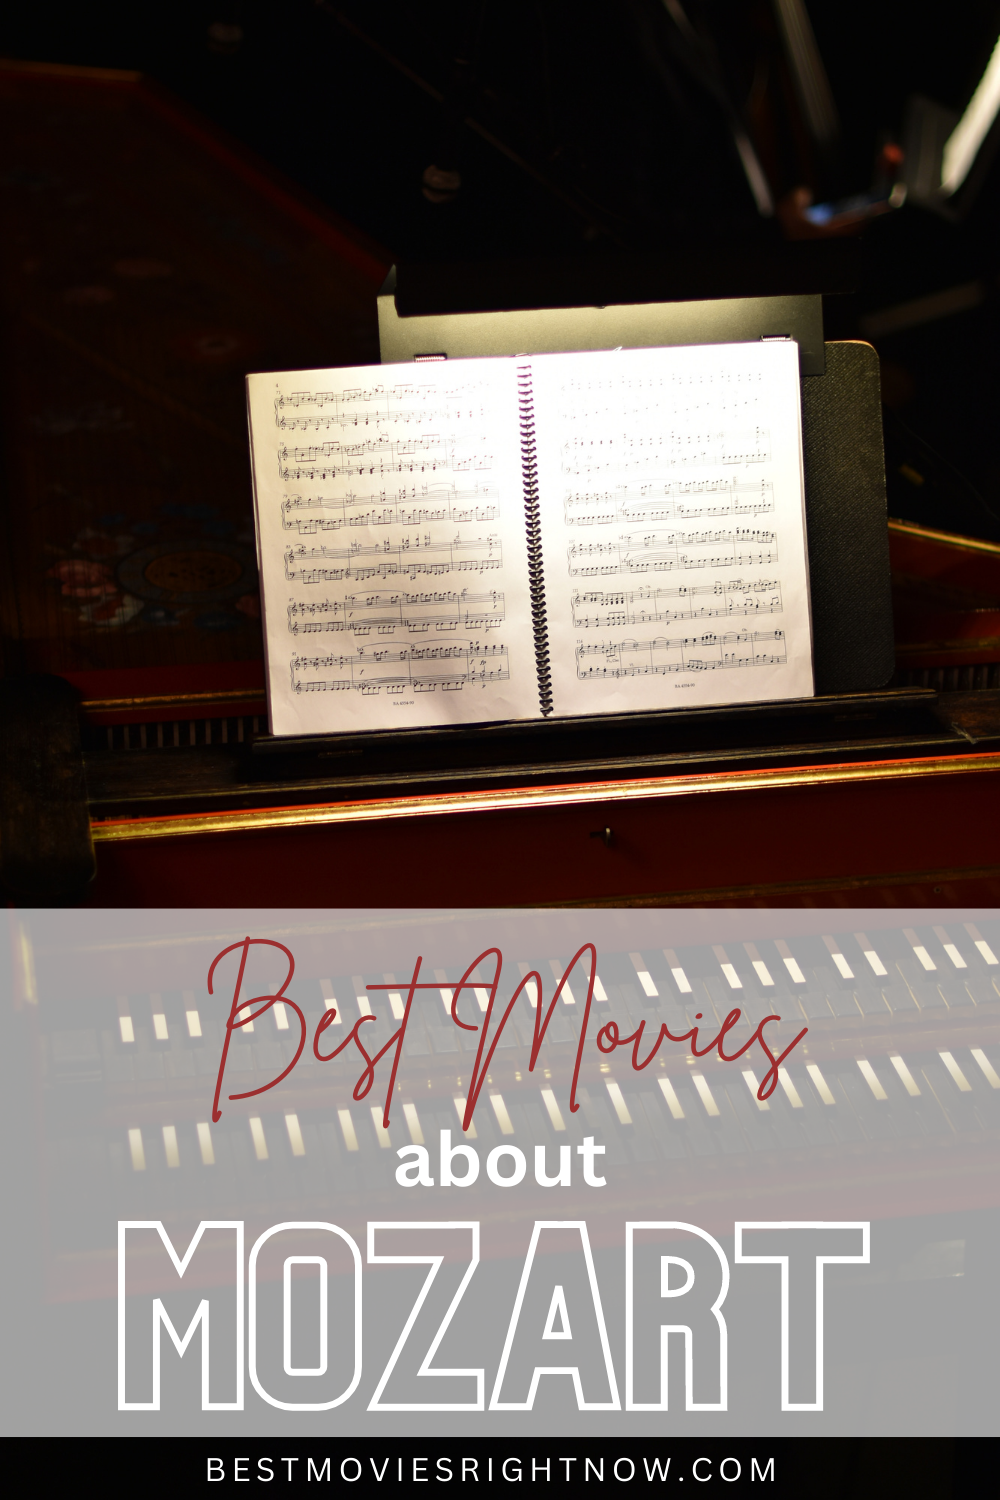 a picture of a piano and a piano chord chart with caption "best movies about Mozart"